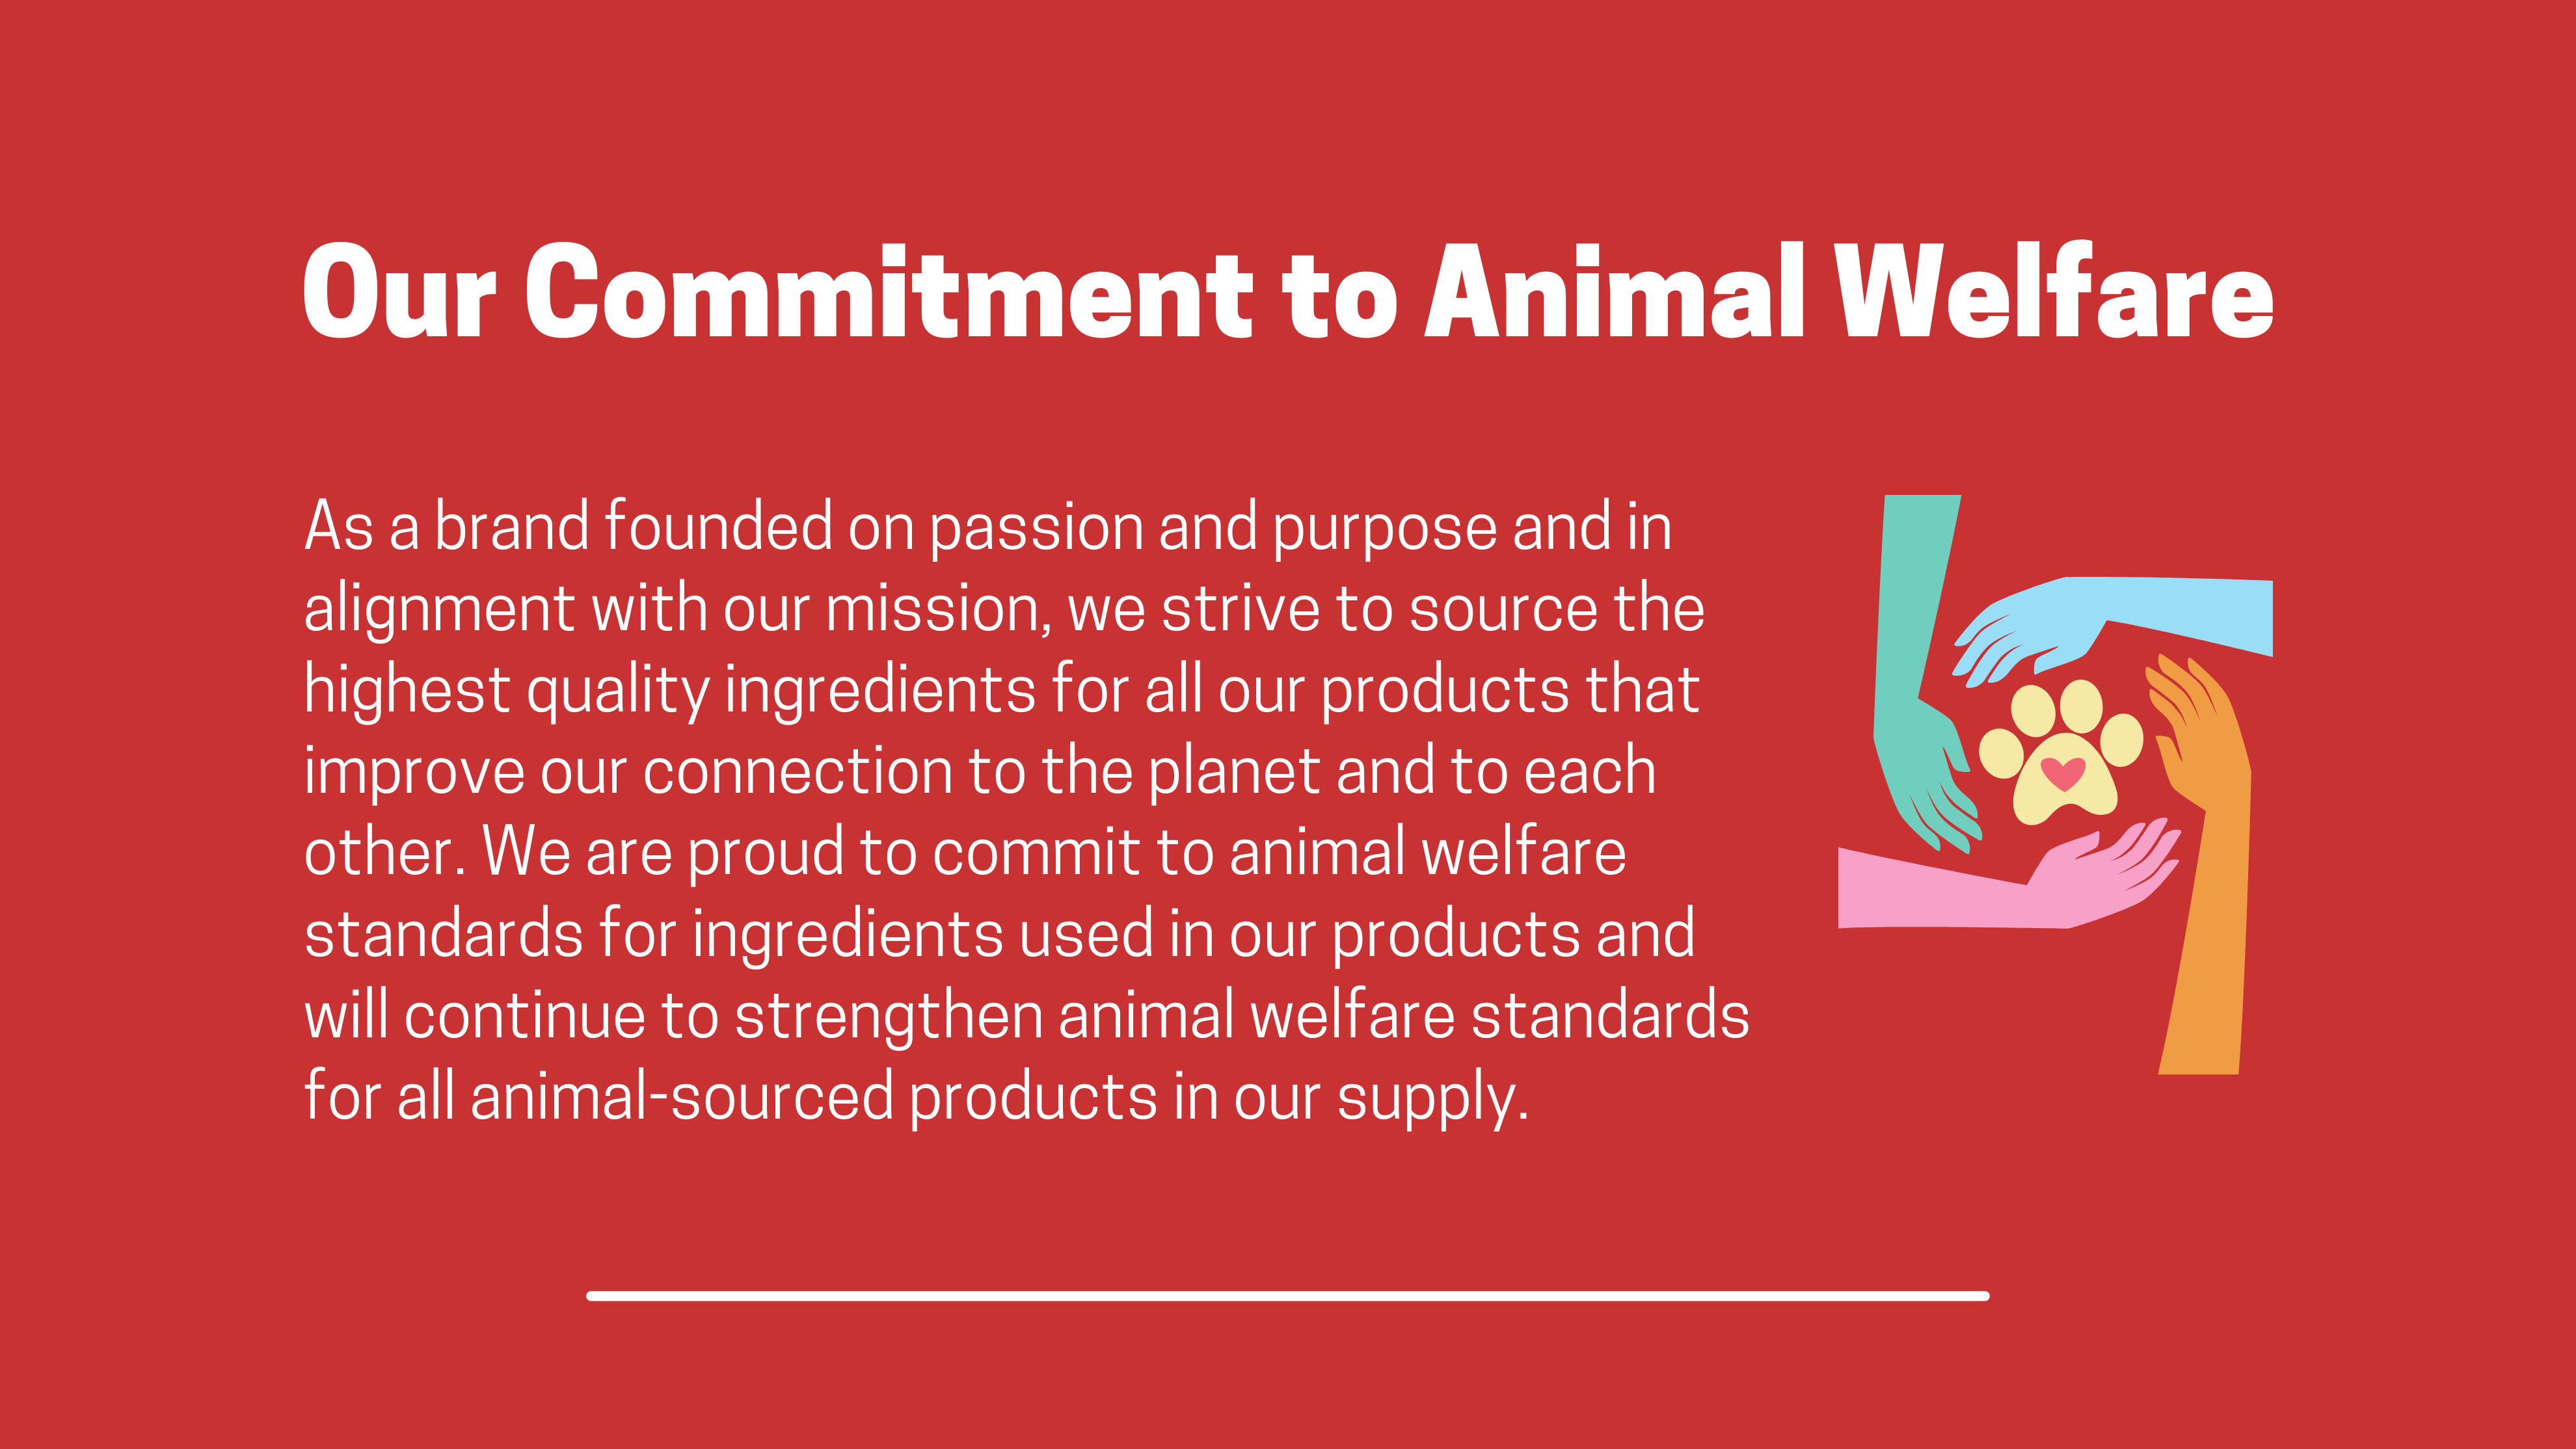 Our Commitment to Animal Welfare